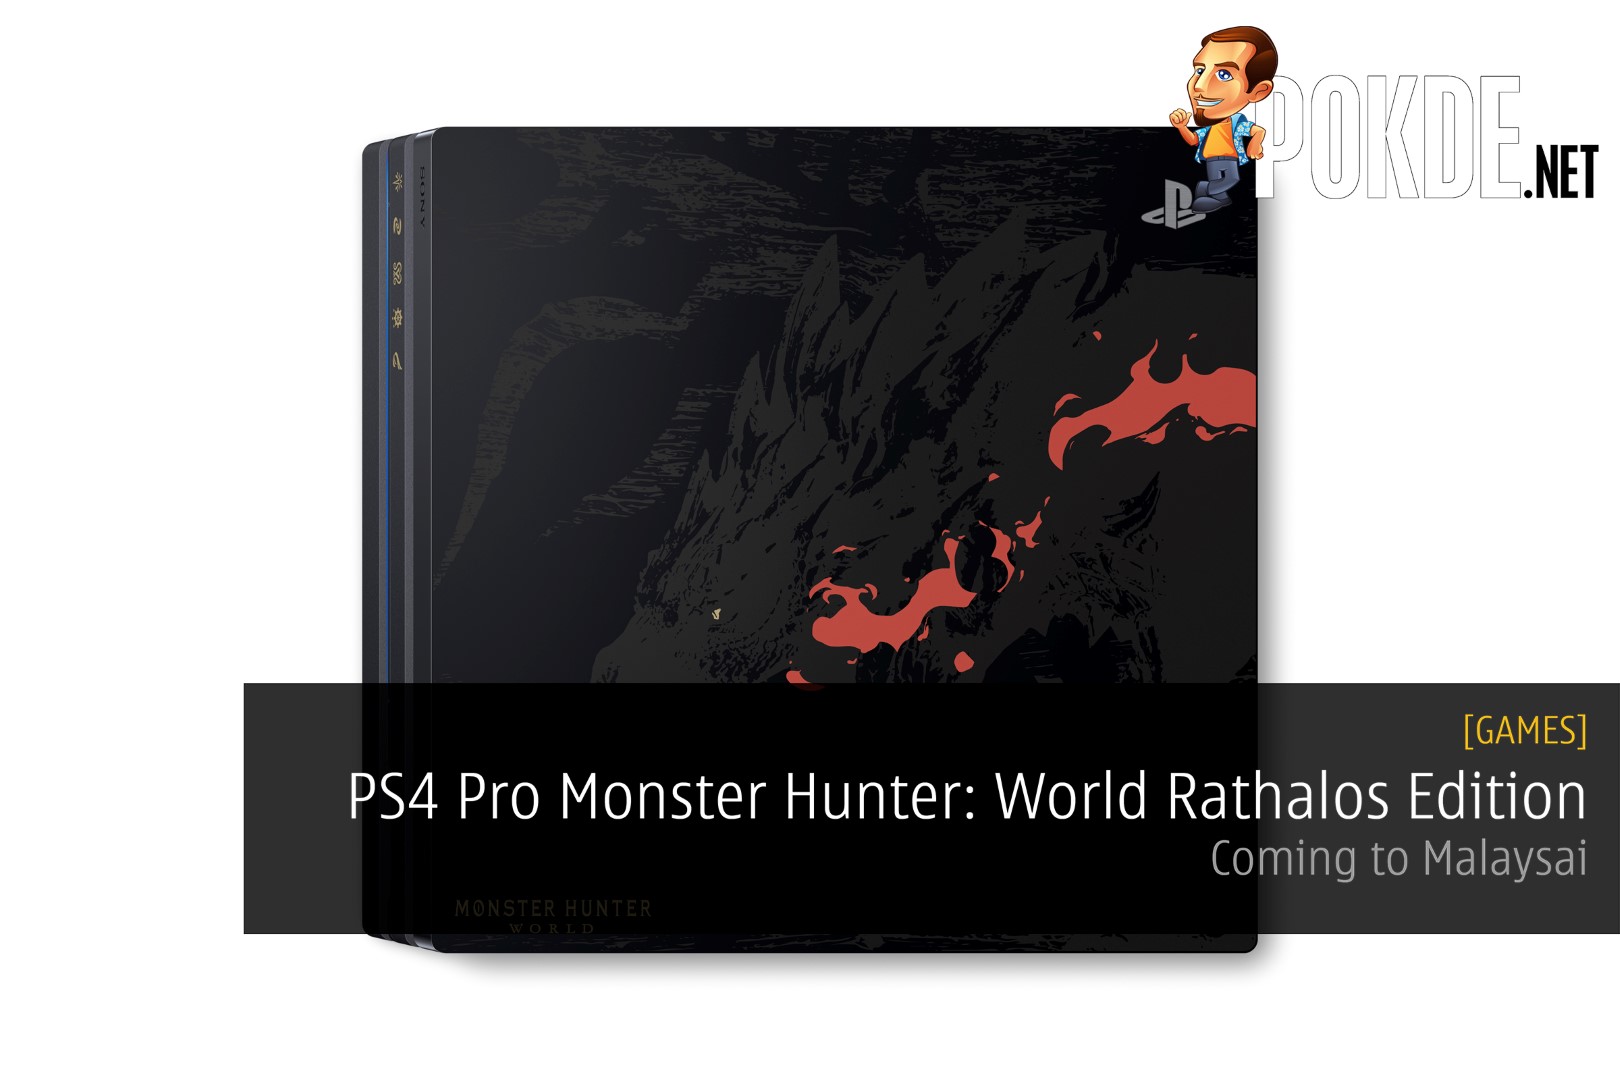 PS4 Pro Monster Hunter: World Rathalos Edition Is Coming To Malaysia! 28